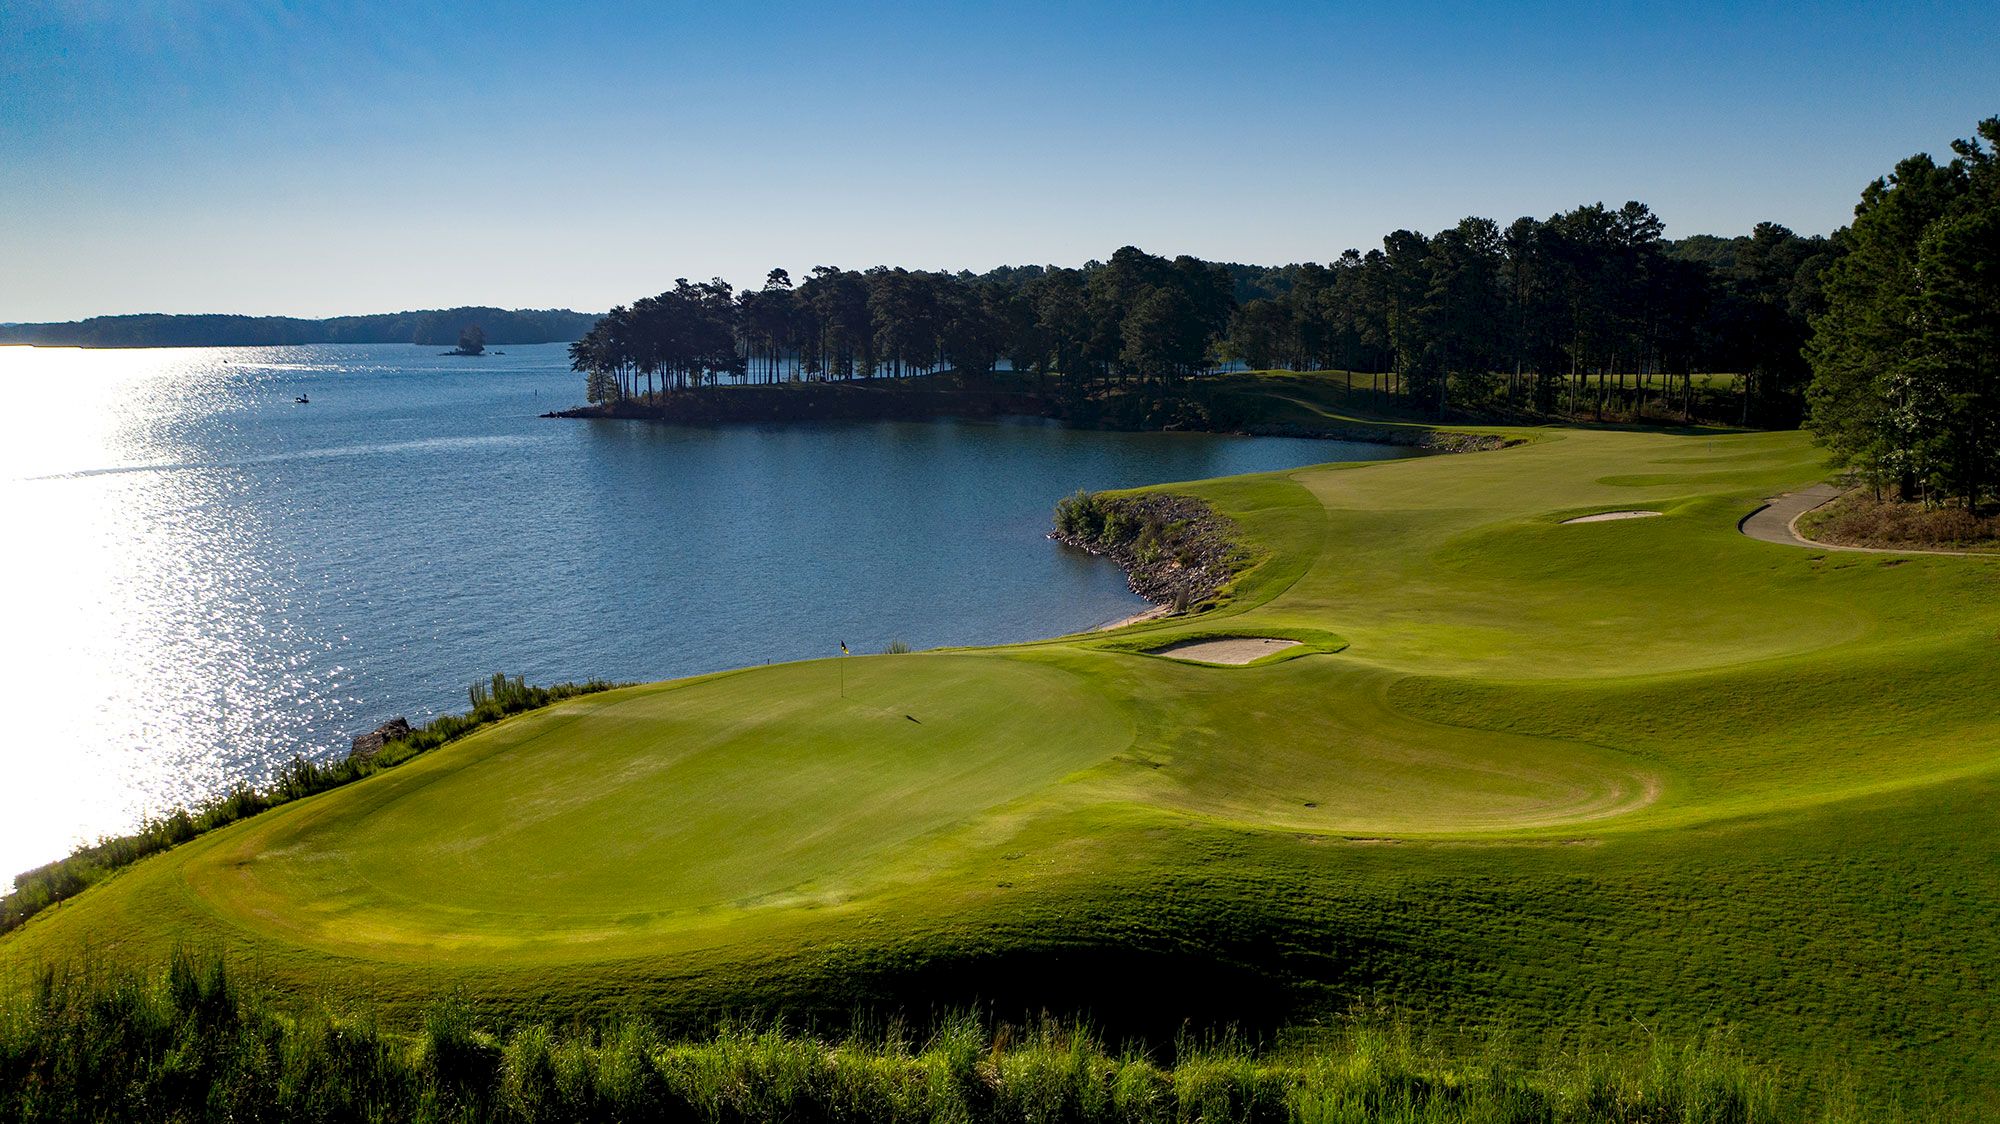 This image shows a serene golf course by a body of water with lush greenery, sand traps, trees, and a clear blue sky in the background.